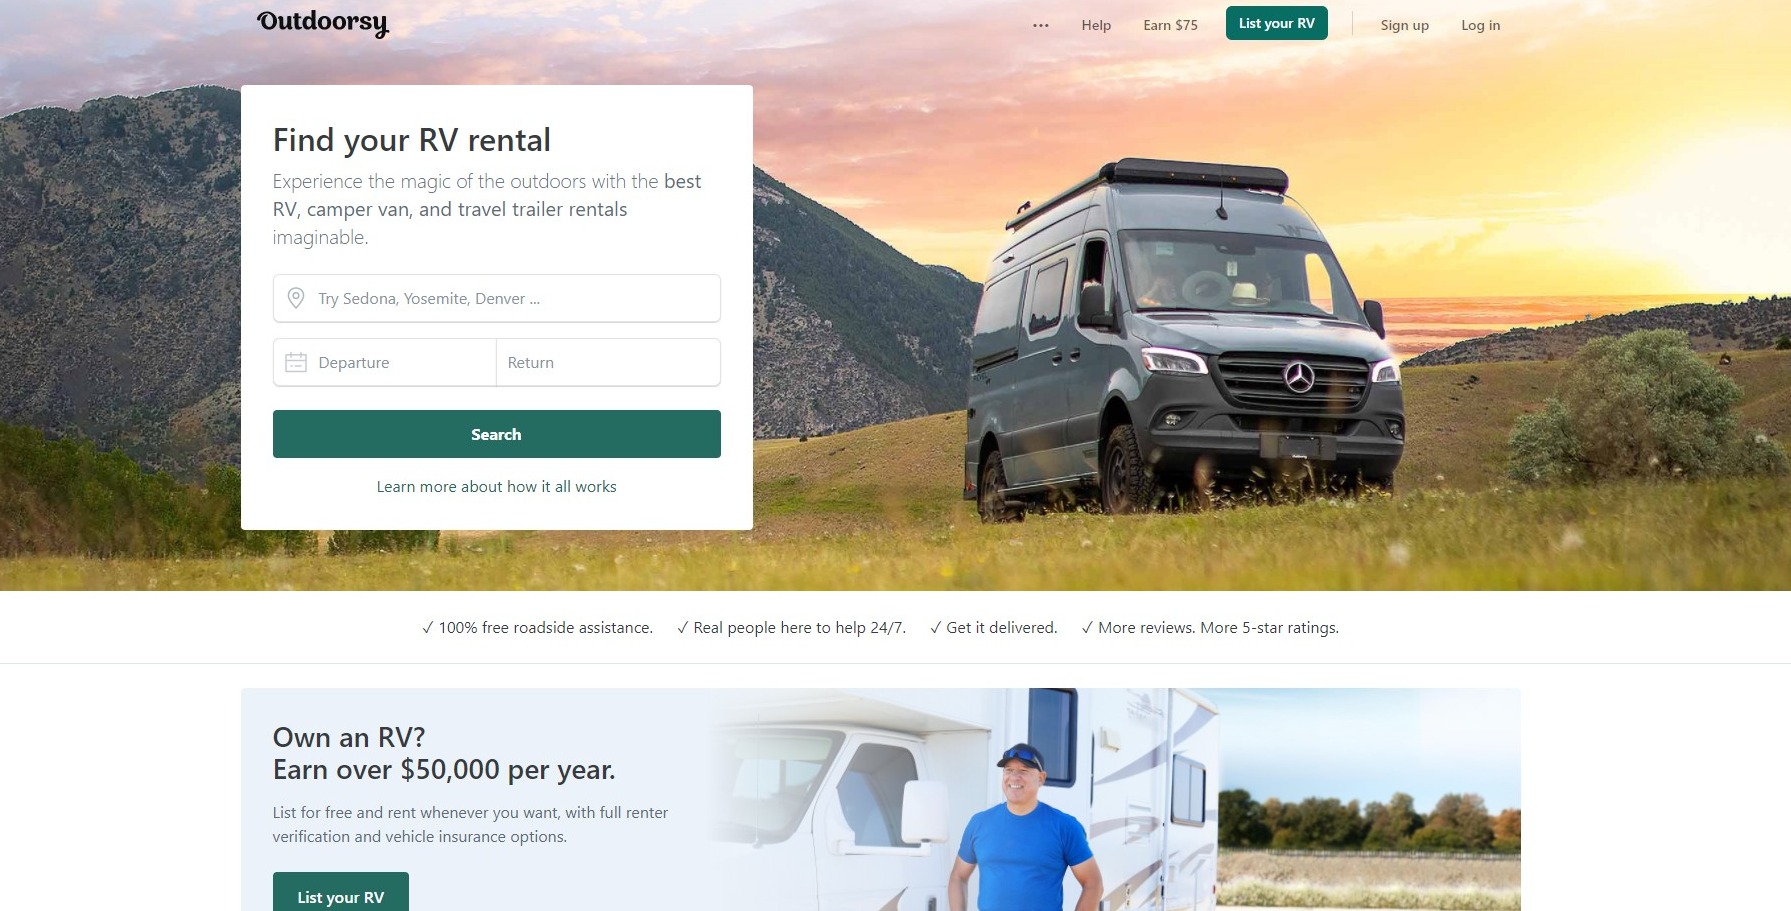 Outdoorsy homepage showing a camper van in a hill with a sunset view